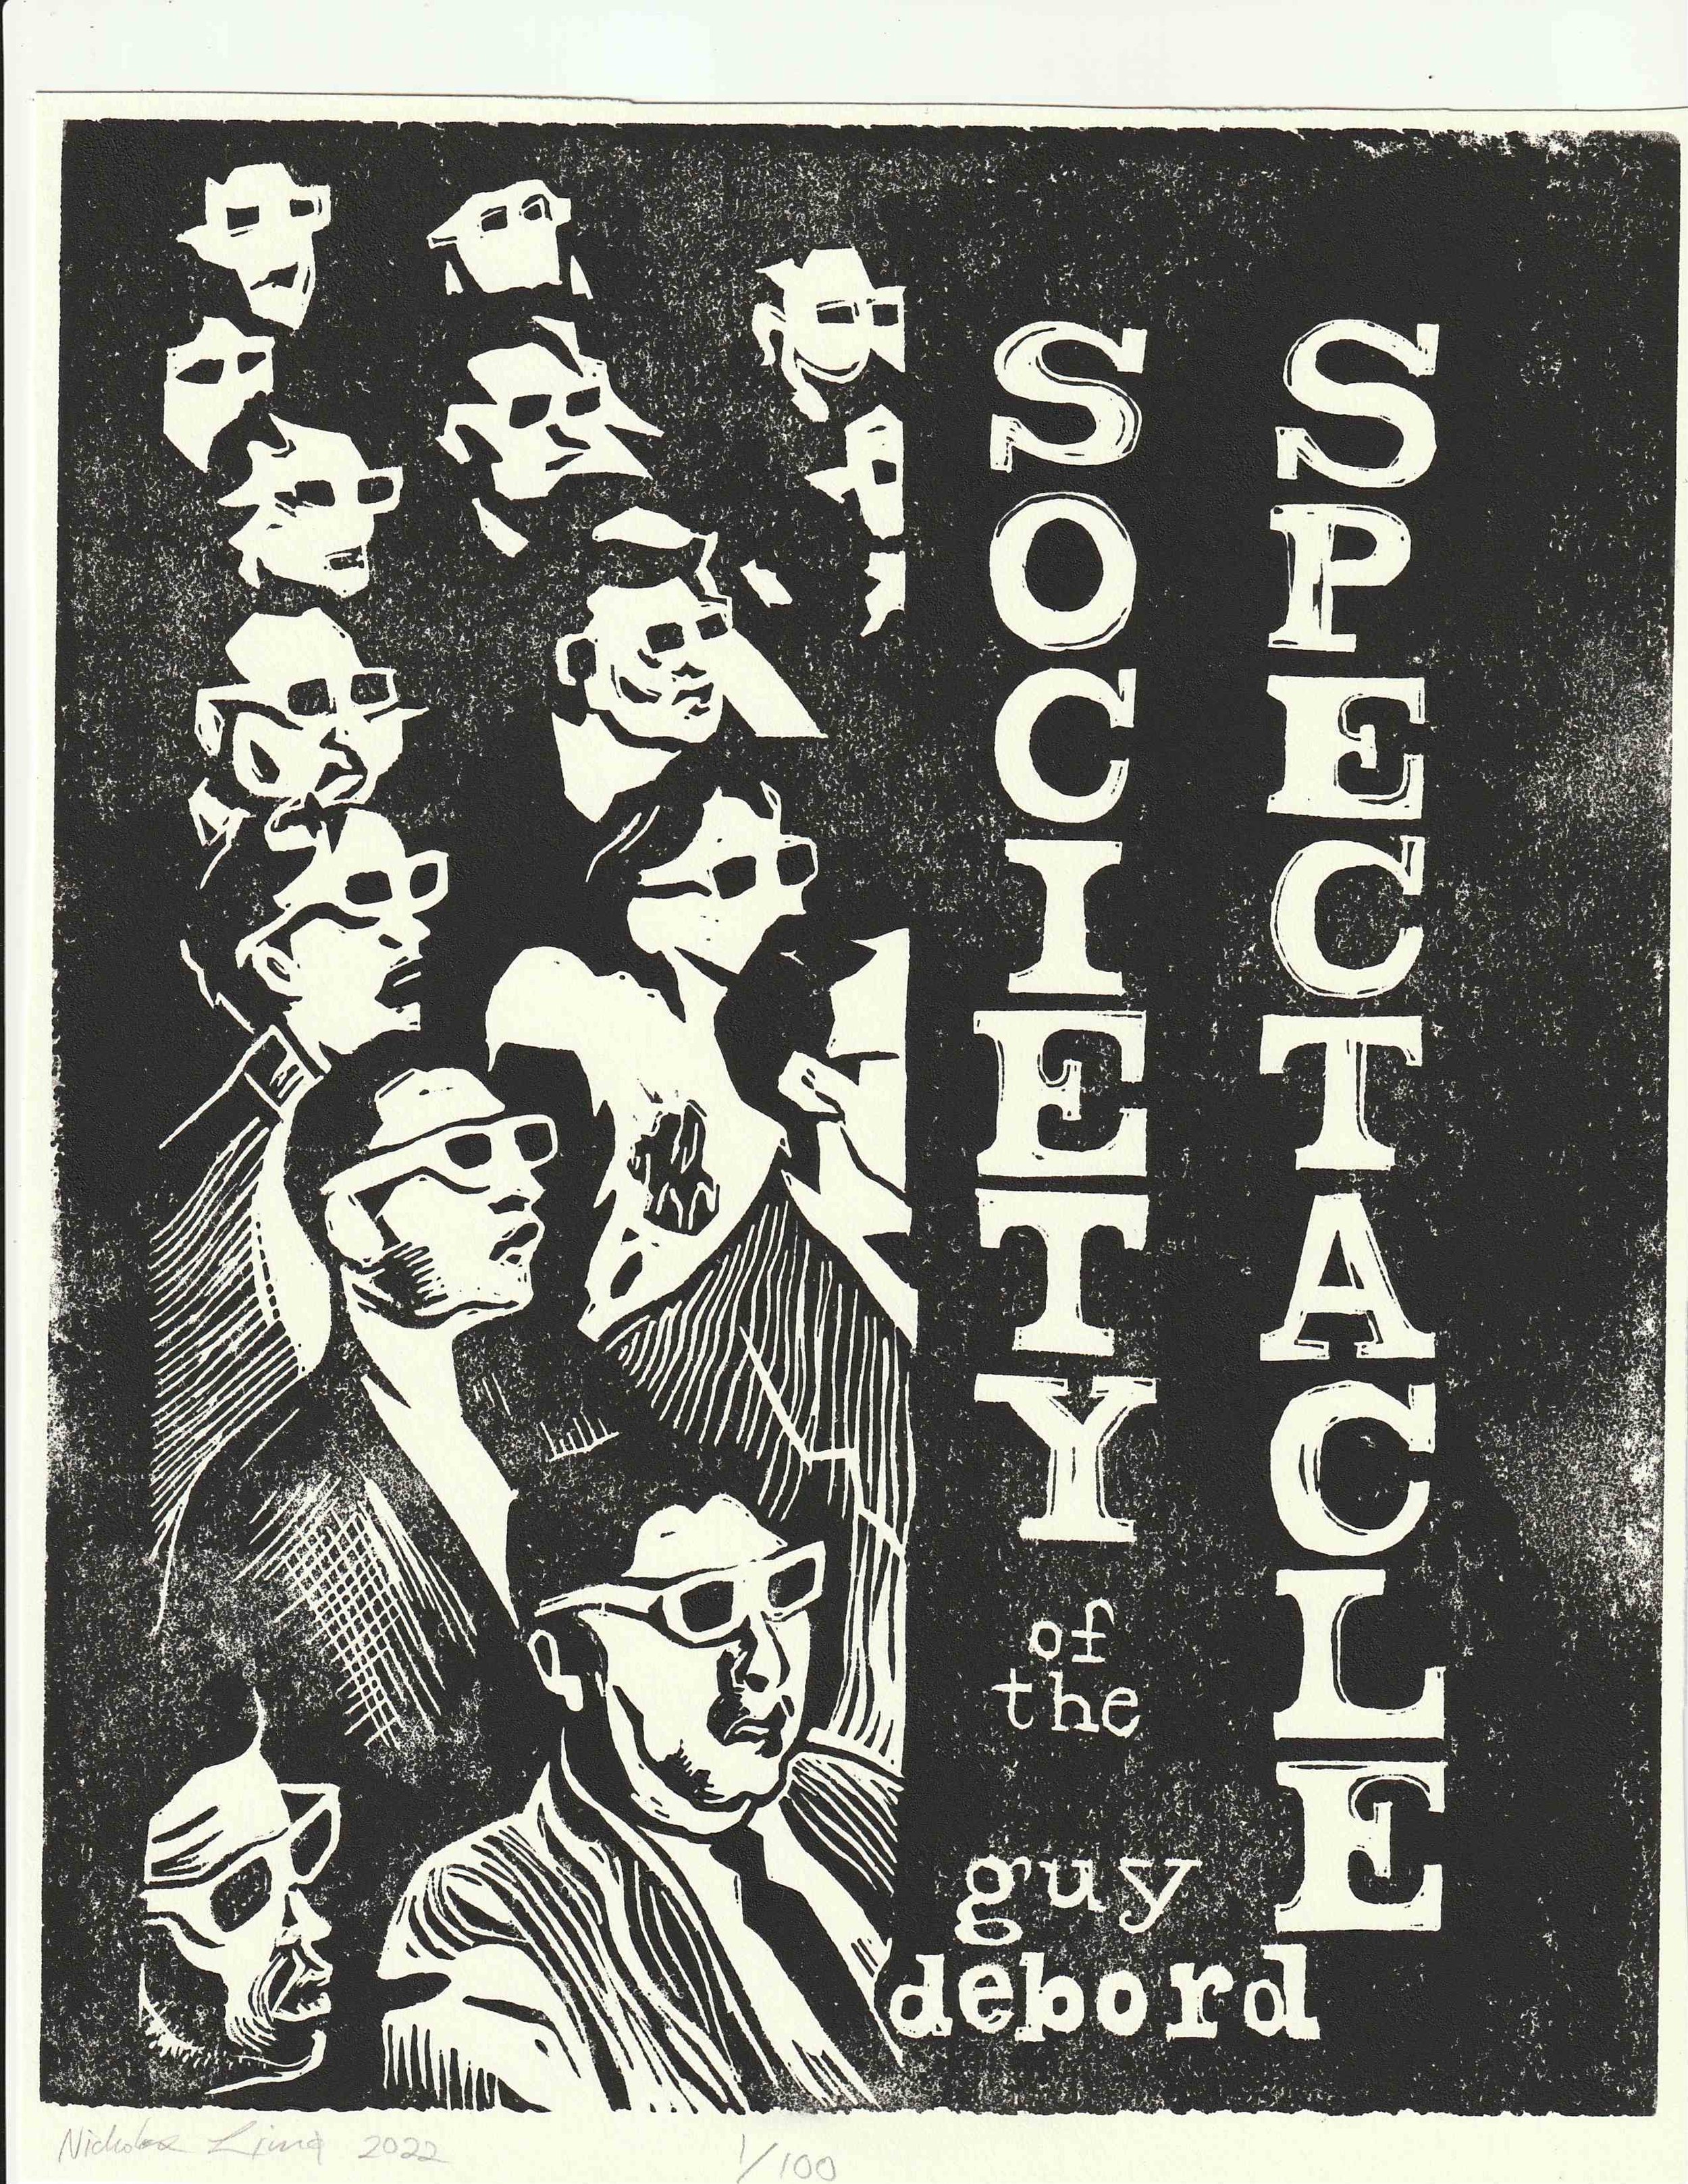 Society of the Spectacle